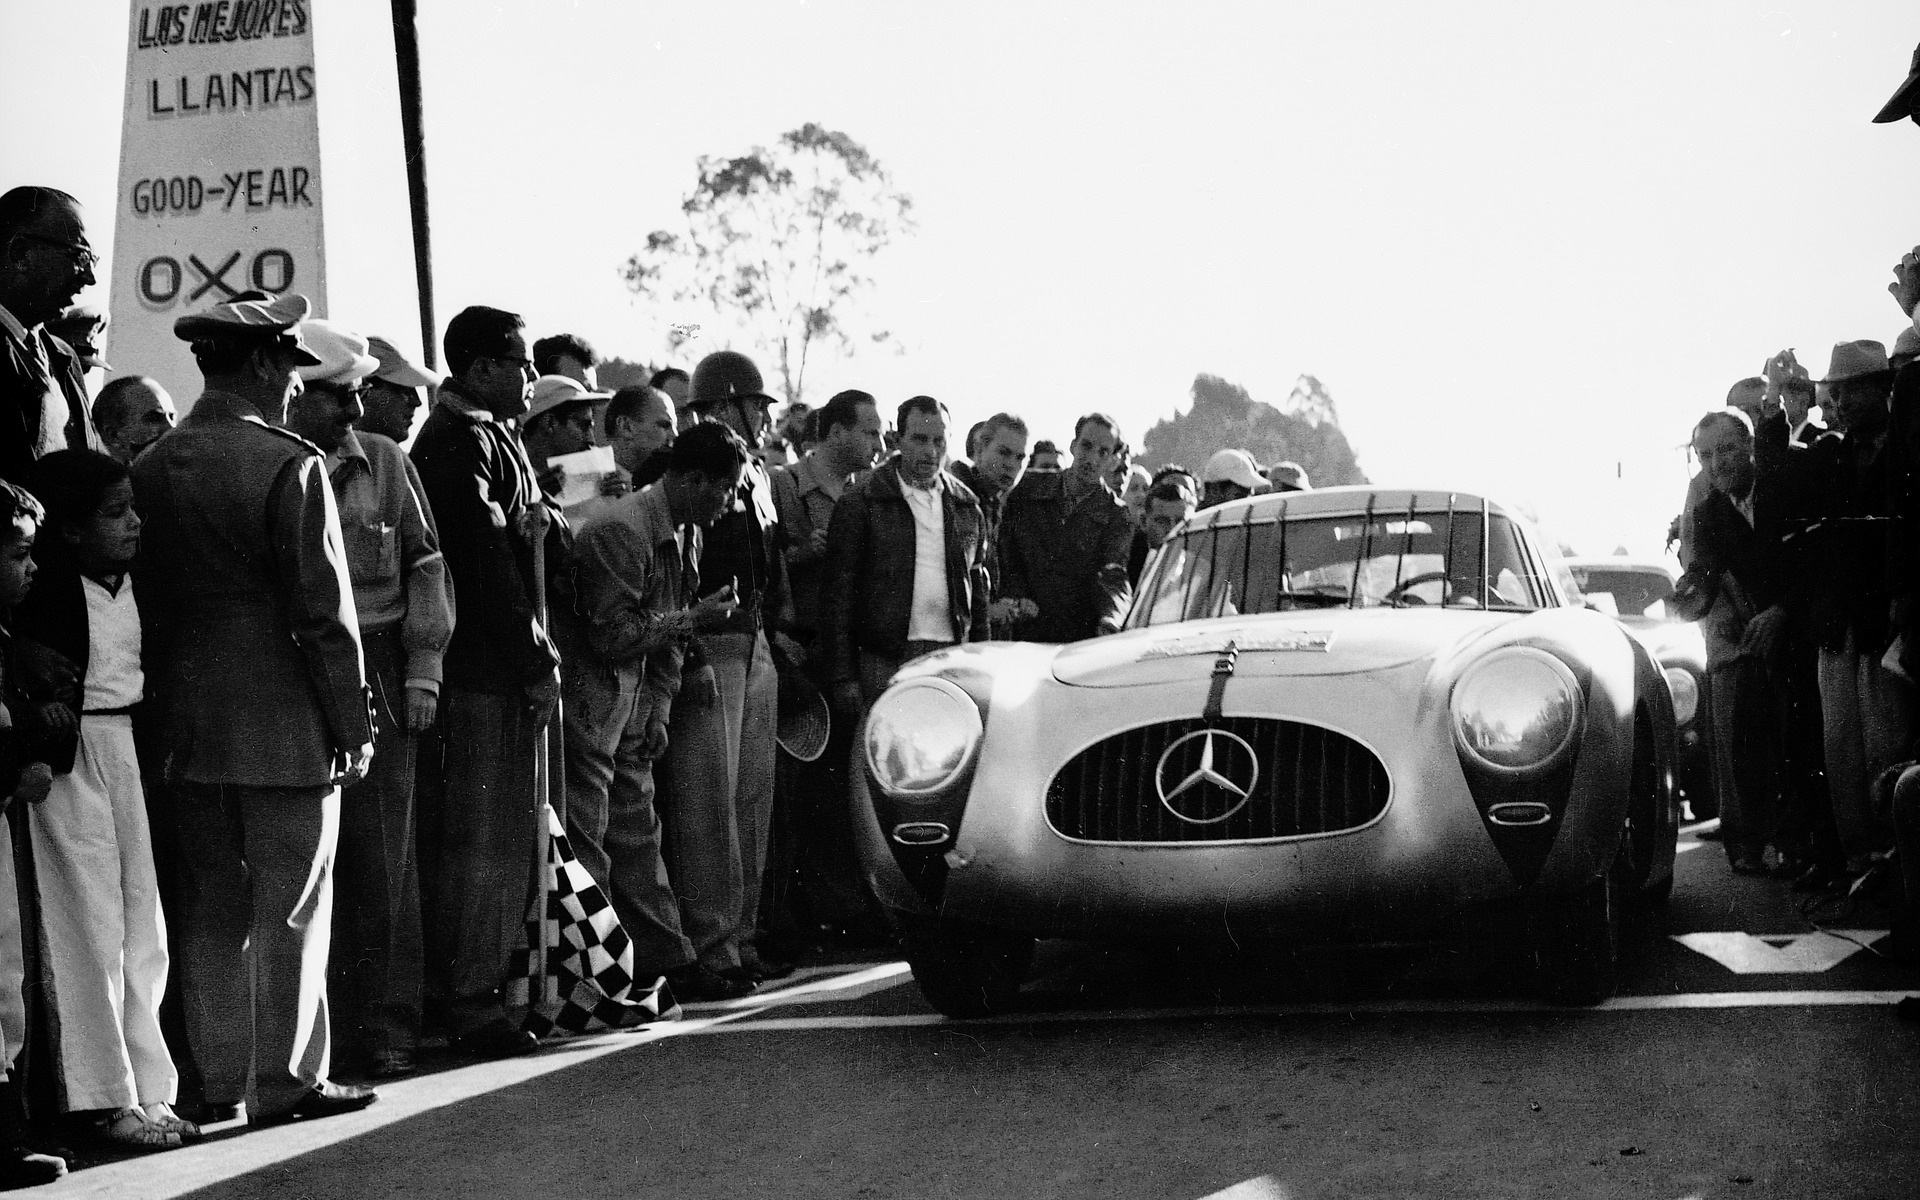 The Mercedes-Benz 300SL that won the Carrera Panamericana race in 1952.